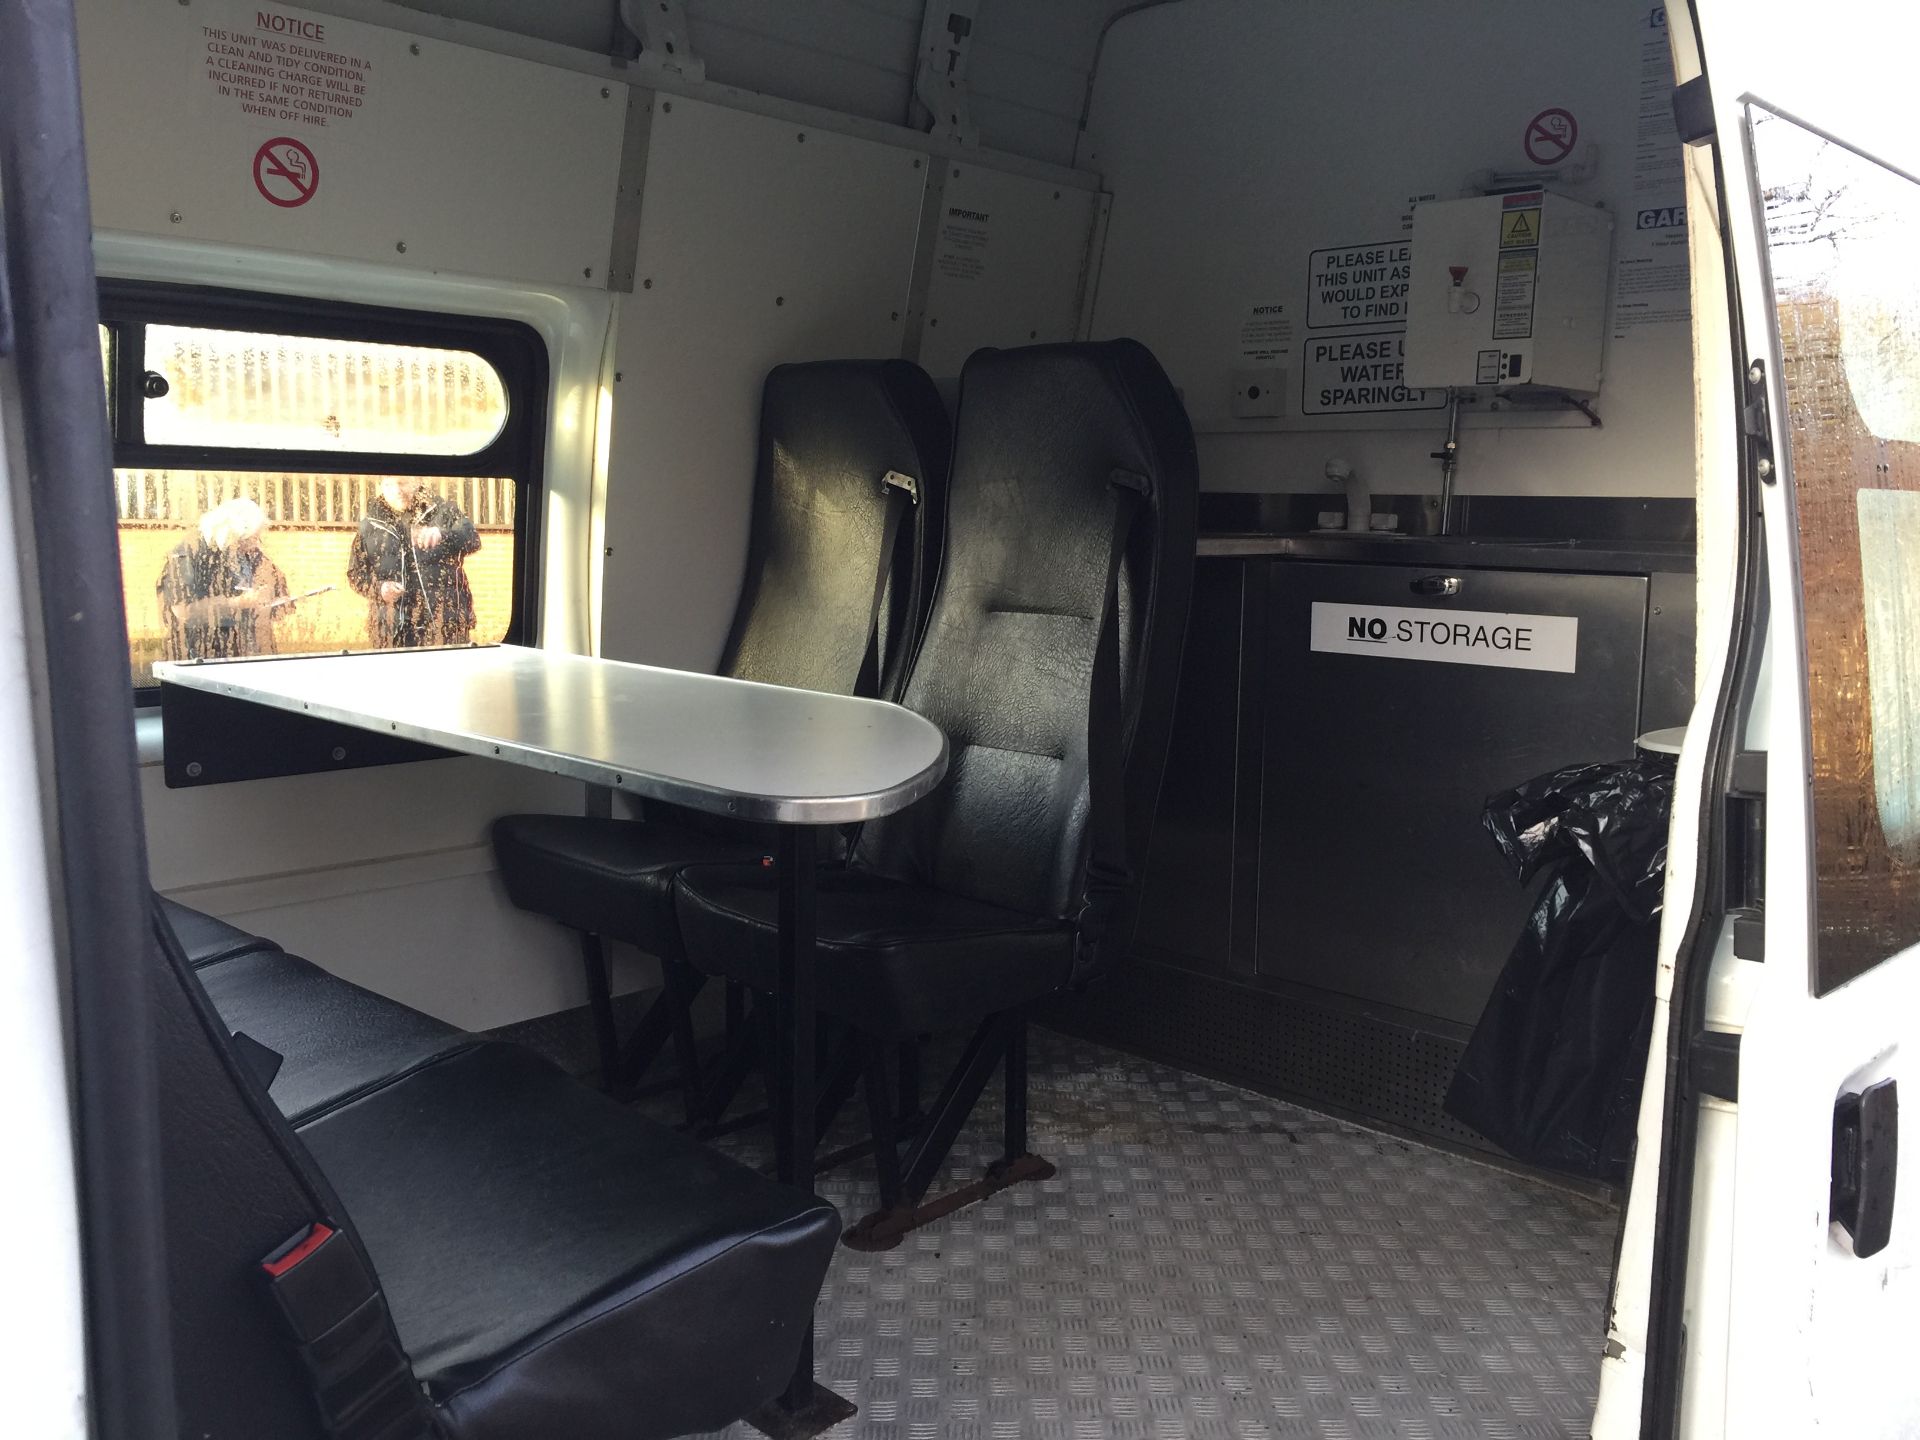 Ford Transit Welfare Van With Seating Area, Cooking Station and Toilet Ex-Commisioned Highway Mainte - Image 10 of 11